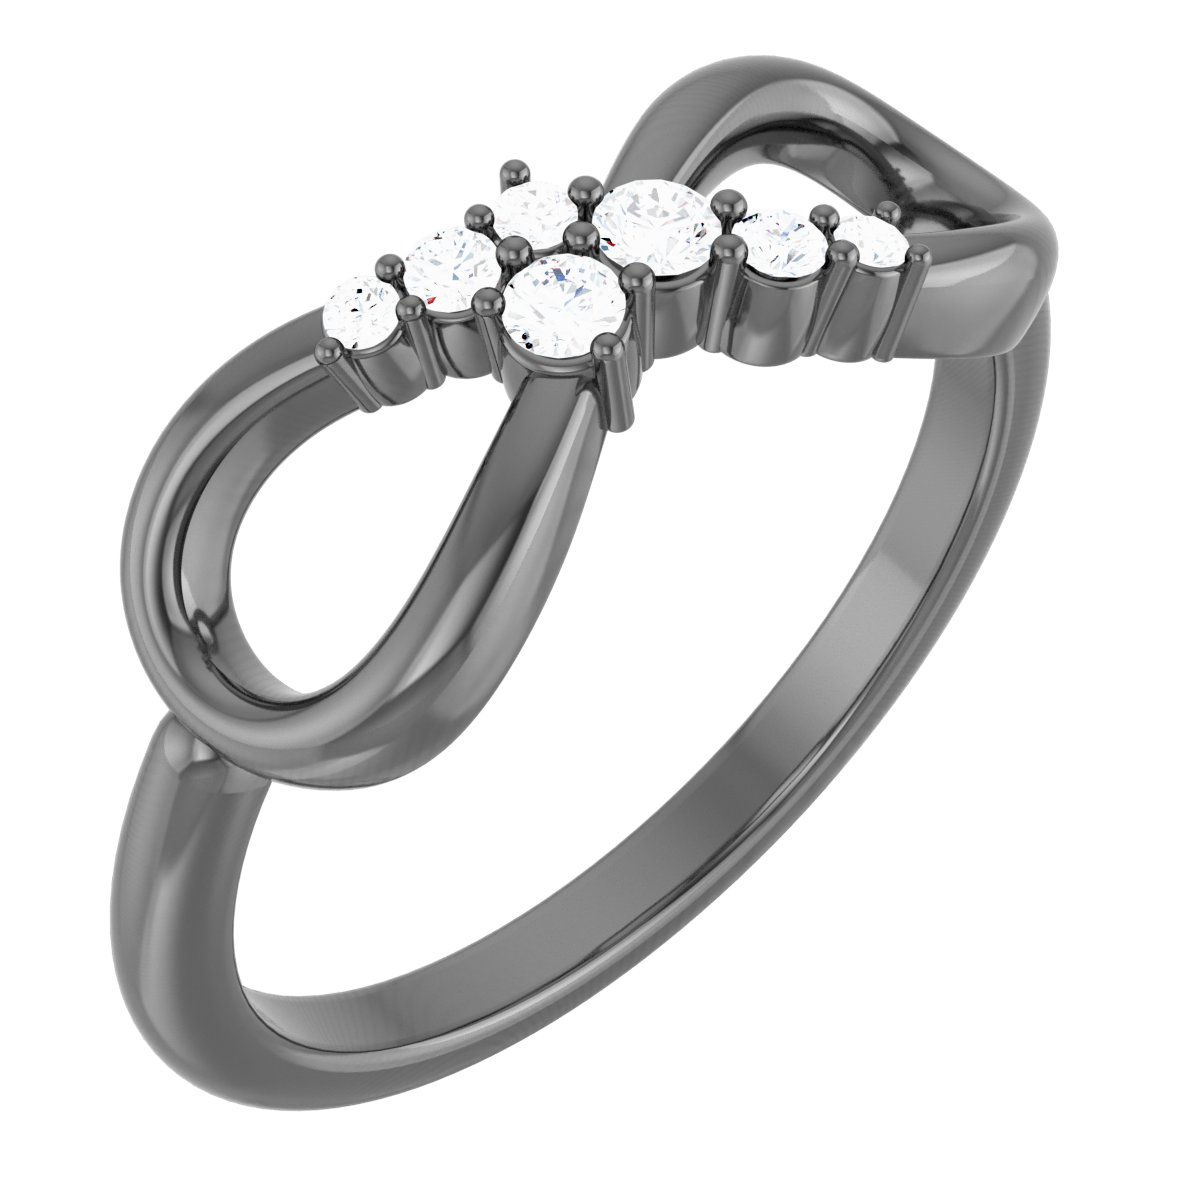 Accented Infinity-Inspired Ring